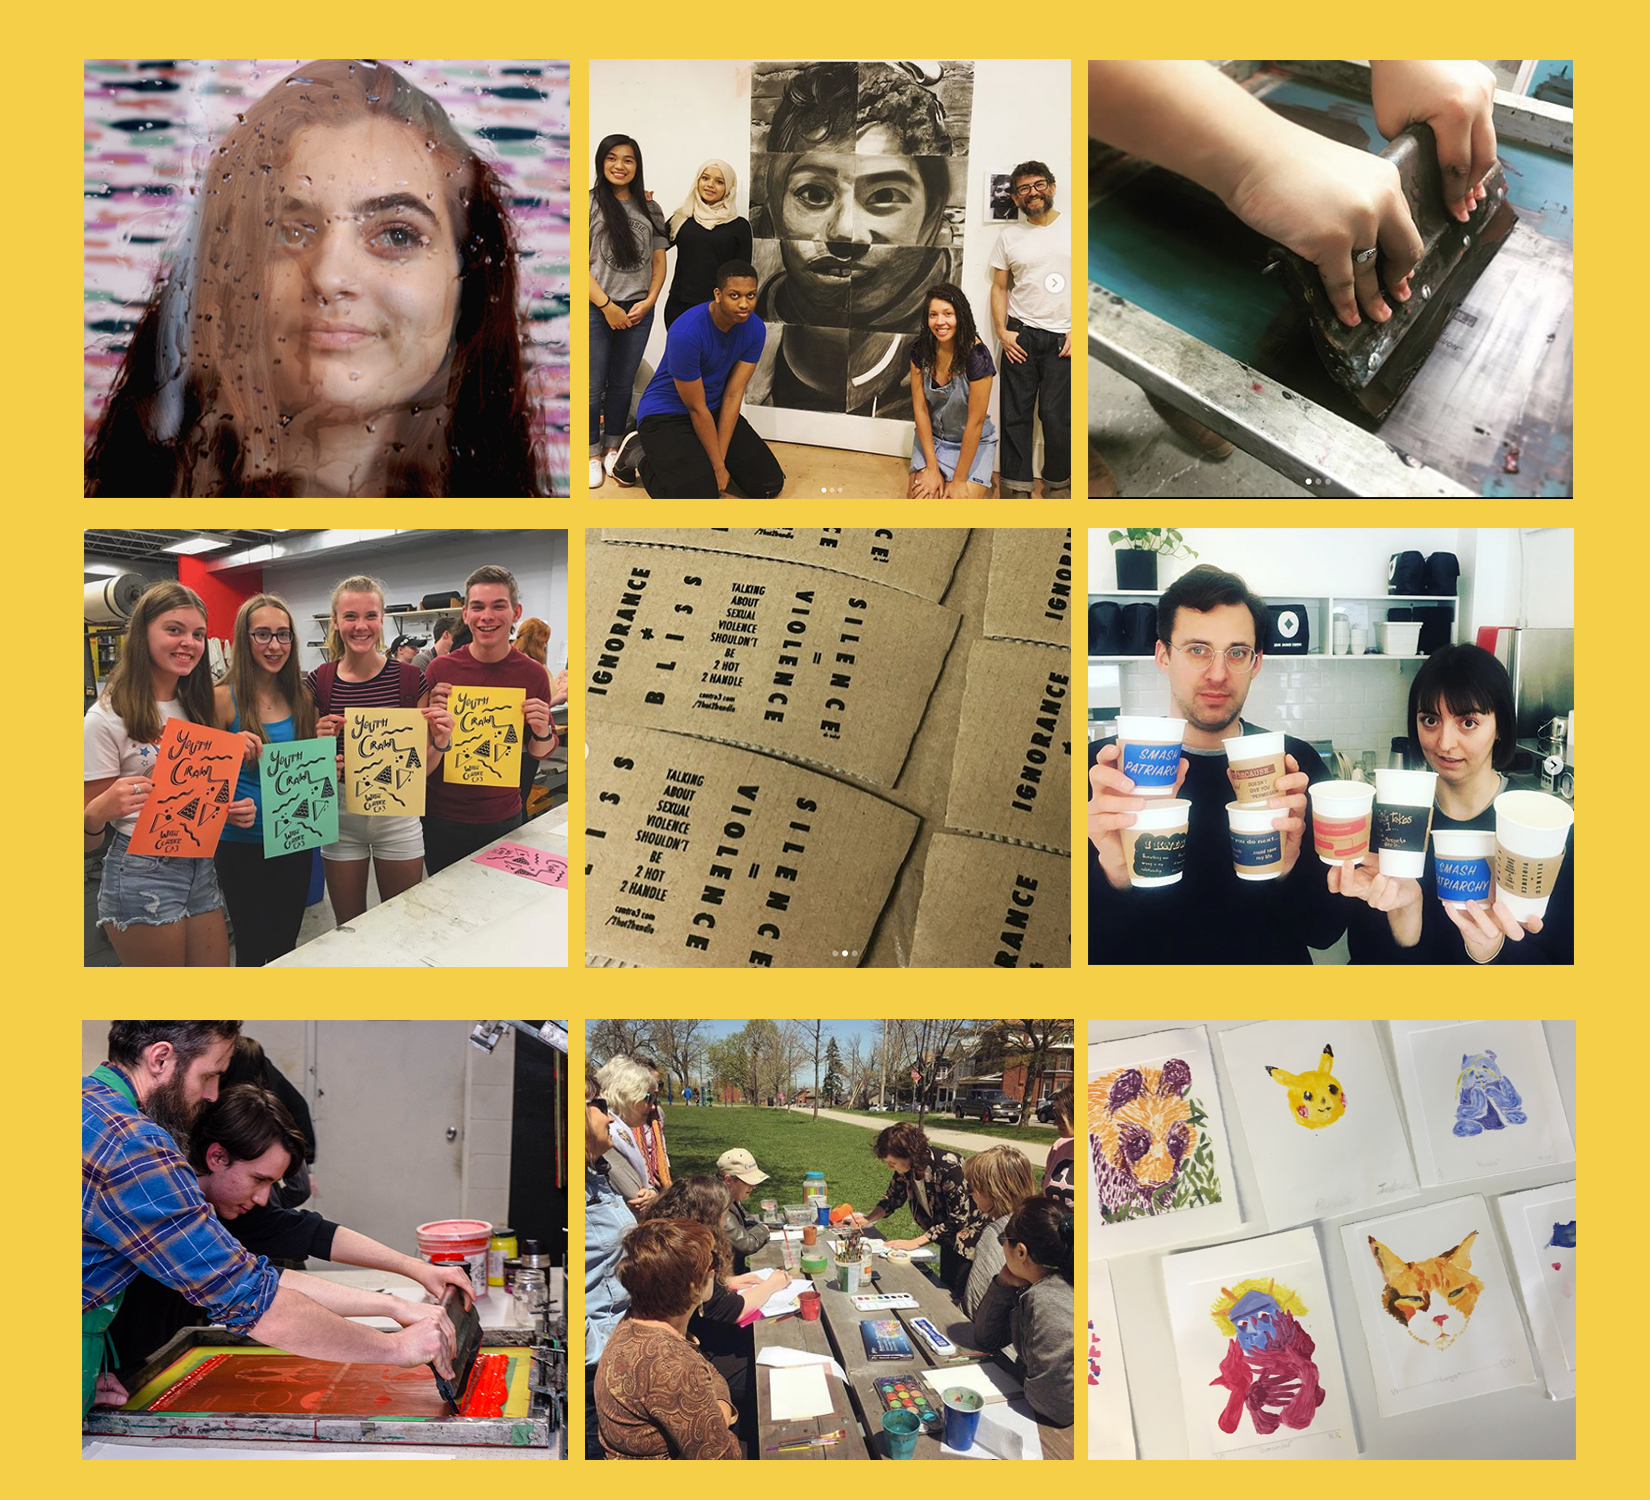 2018-2019 Art Education & Community Arts Exhibition, Enriching the Quality of Life in the Hamilton Community through the Arts